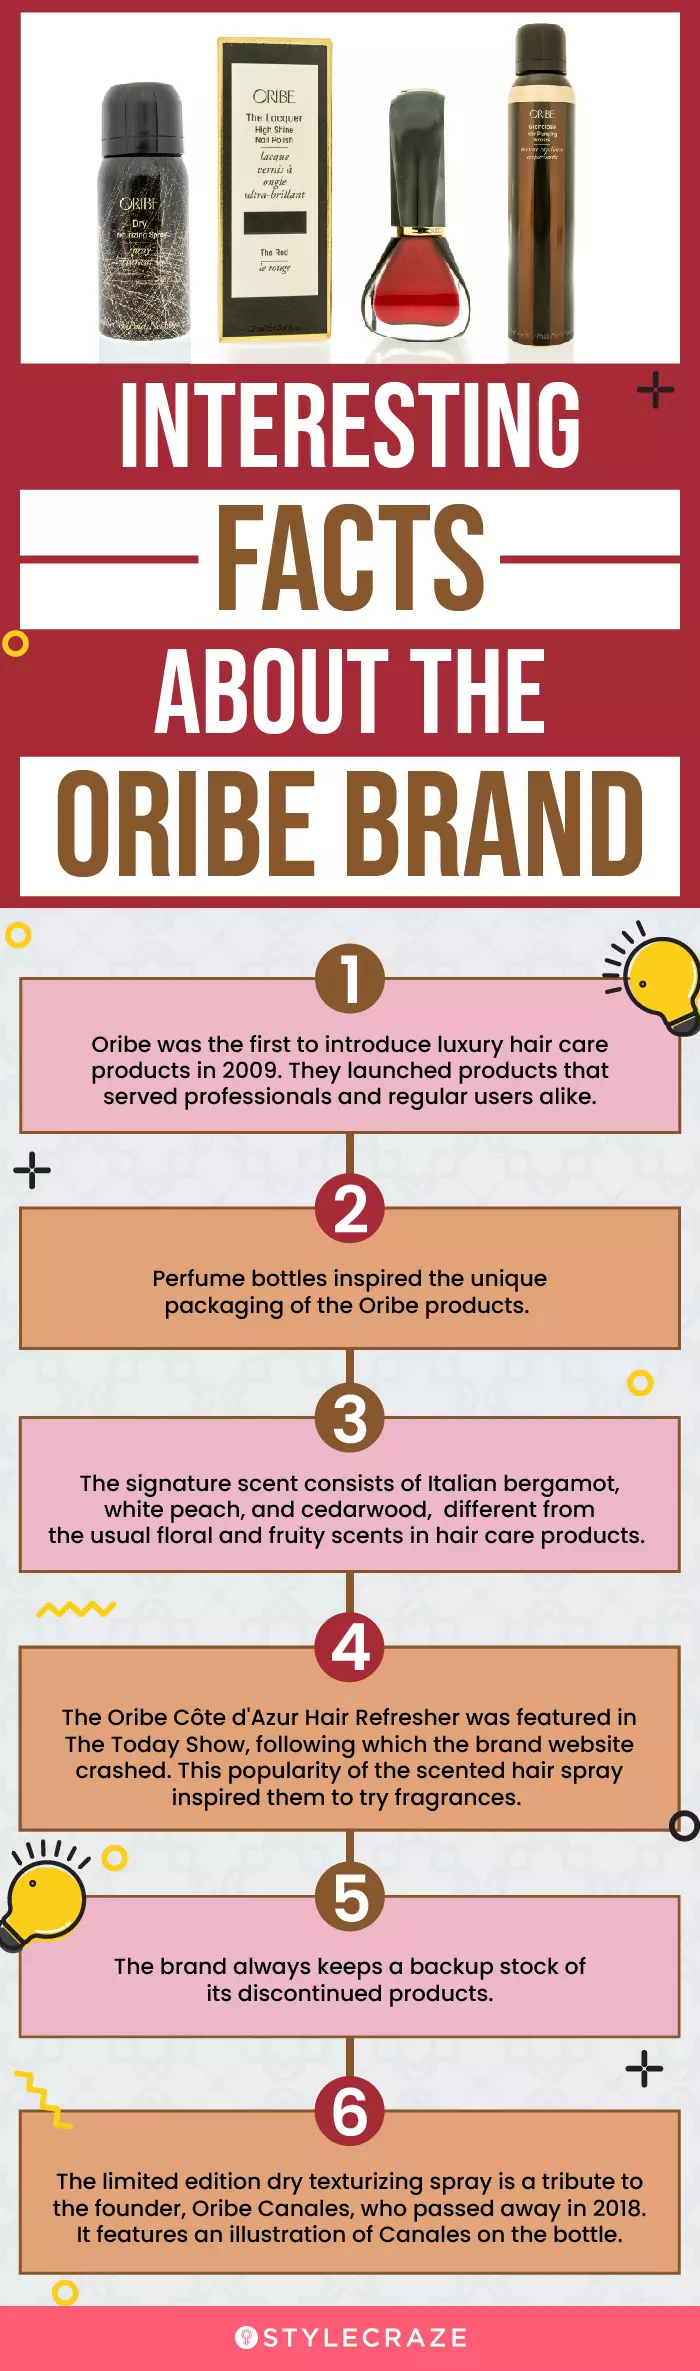 Interesting Facts About The Oribe Brand (infographic)